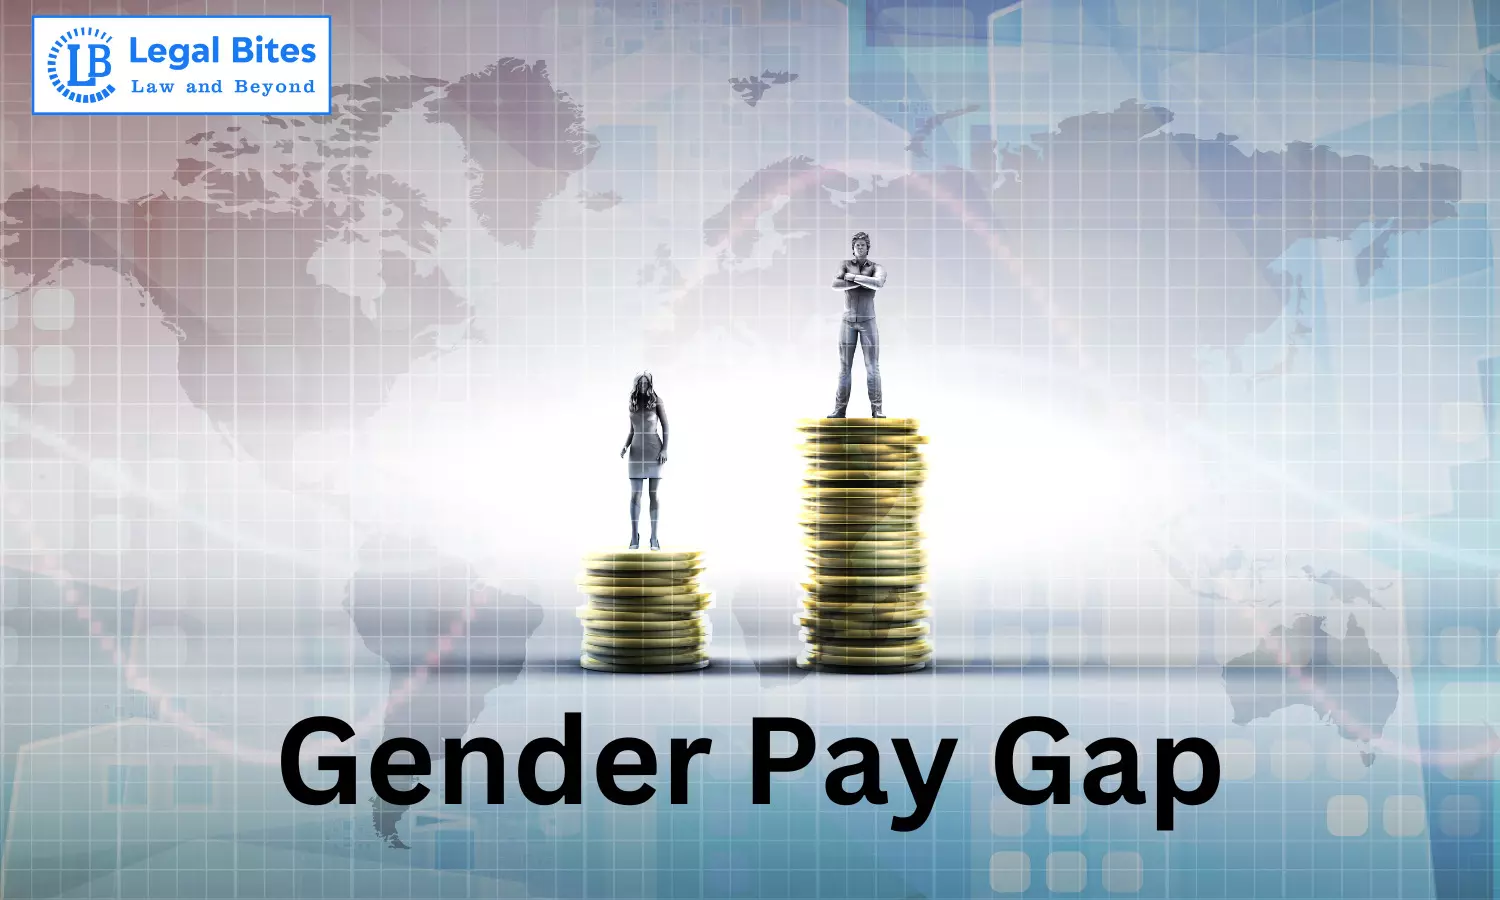 Gender Pay Gap at Workplaces: Indian Aspect